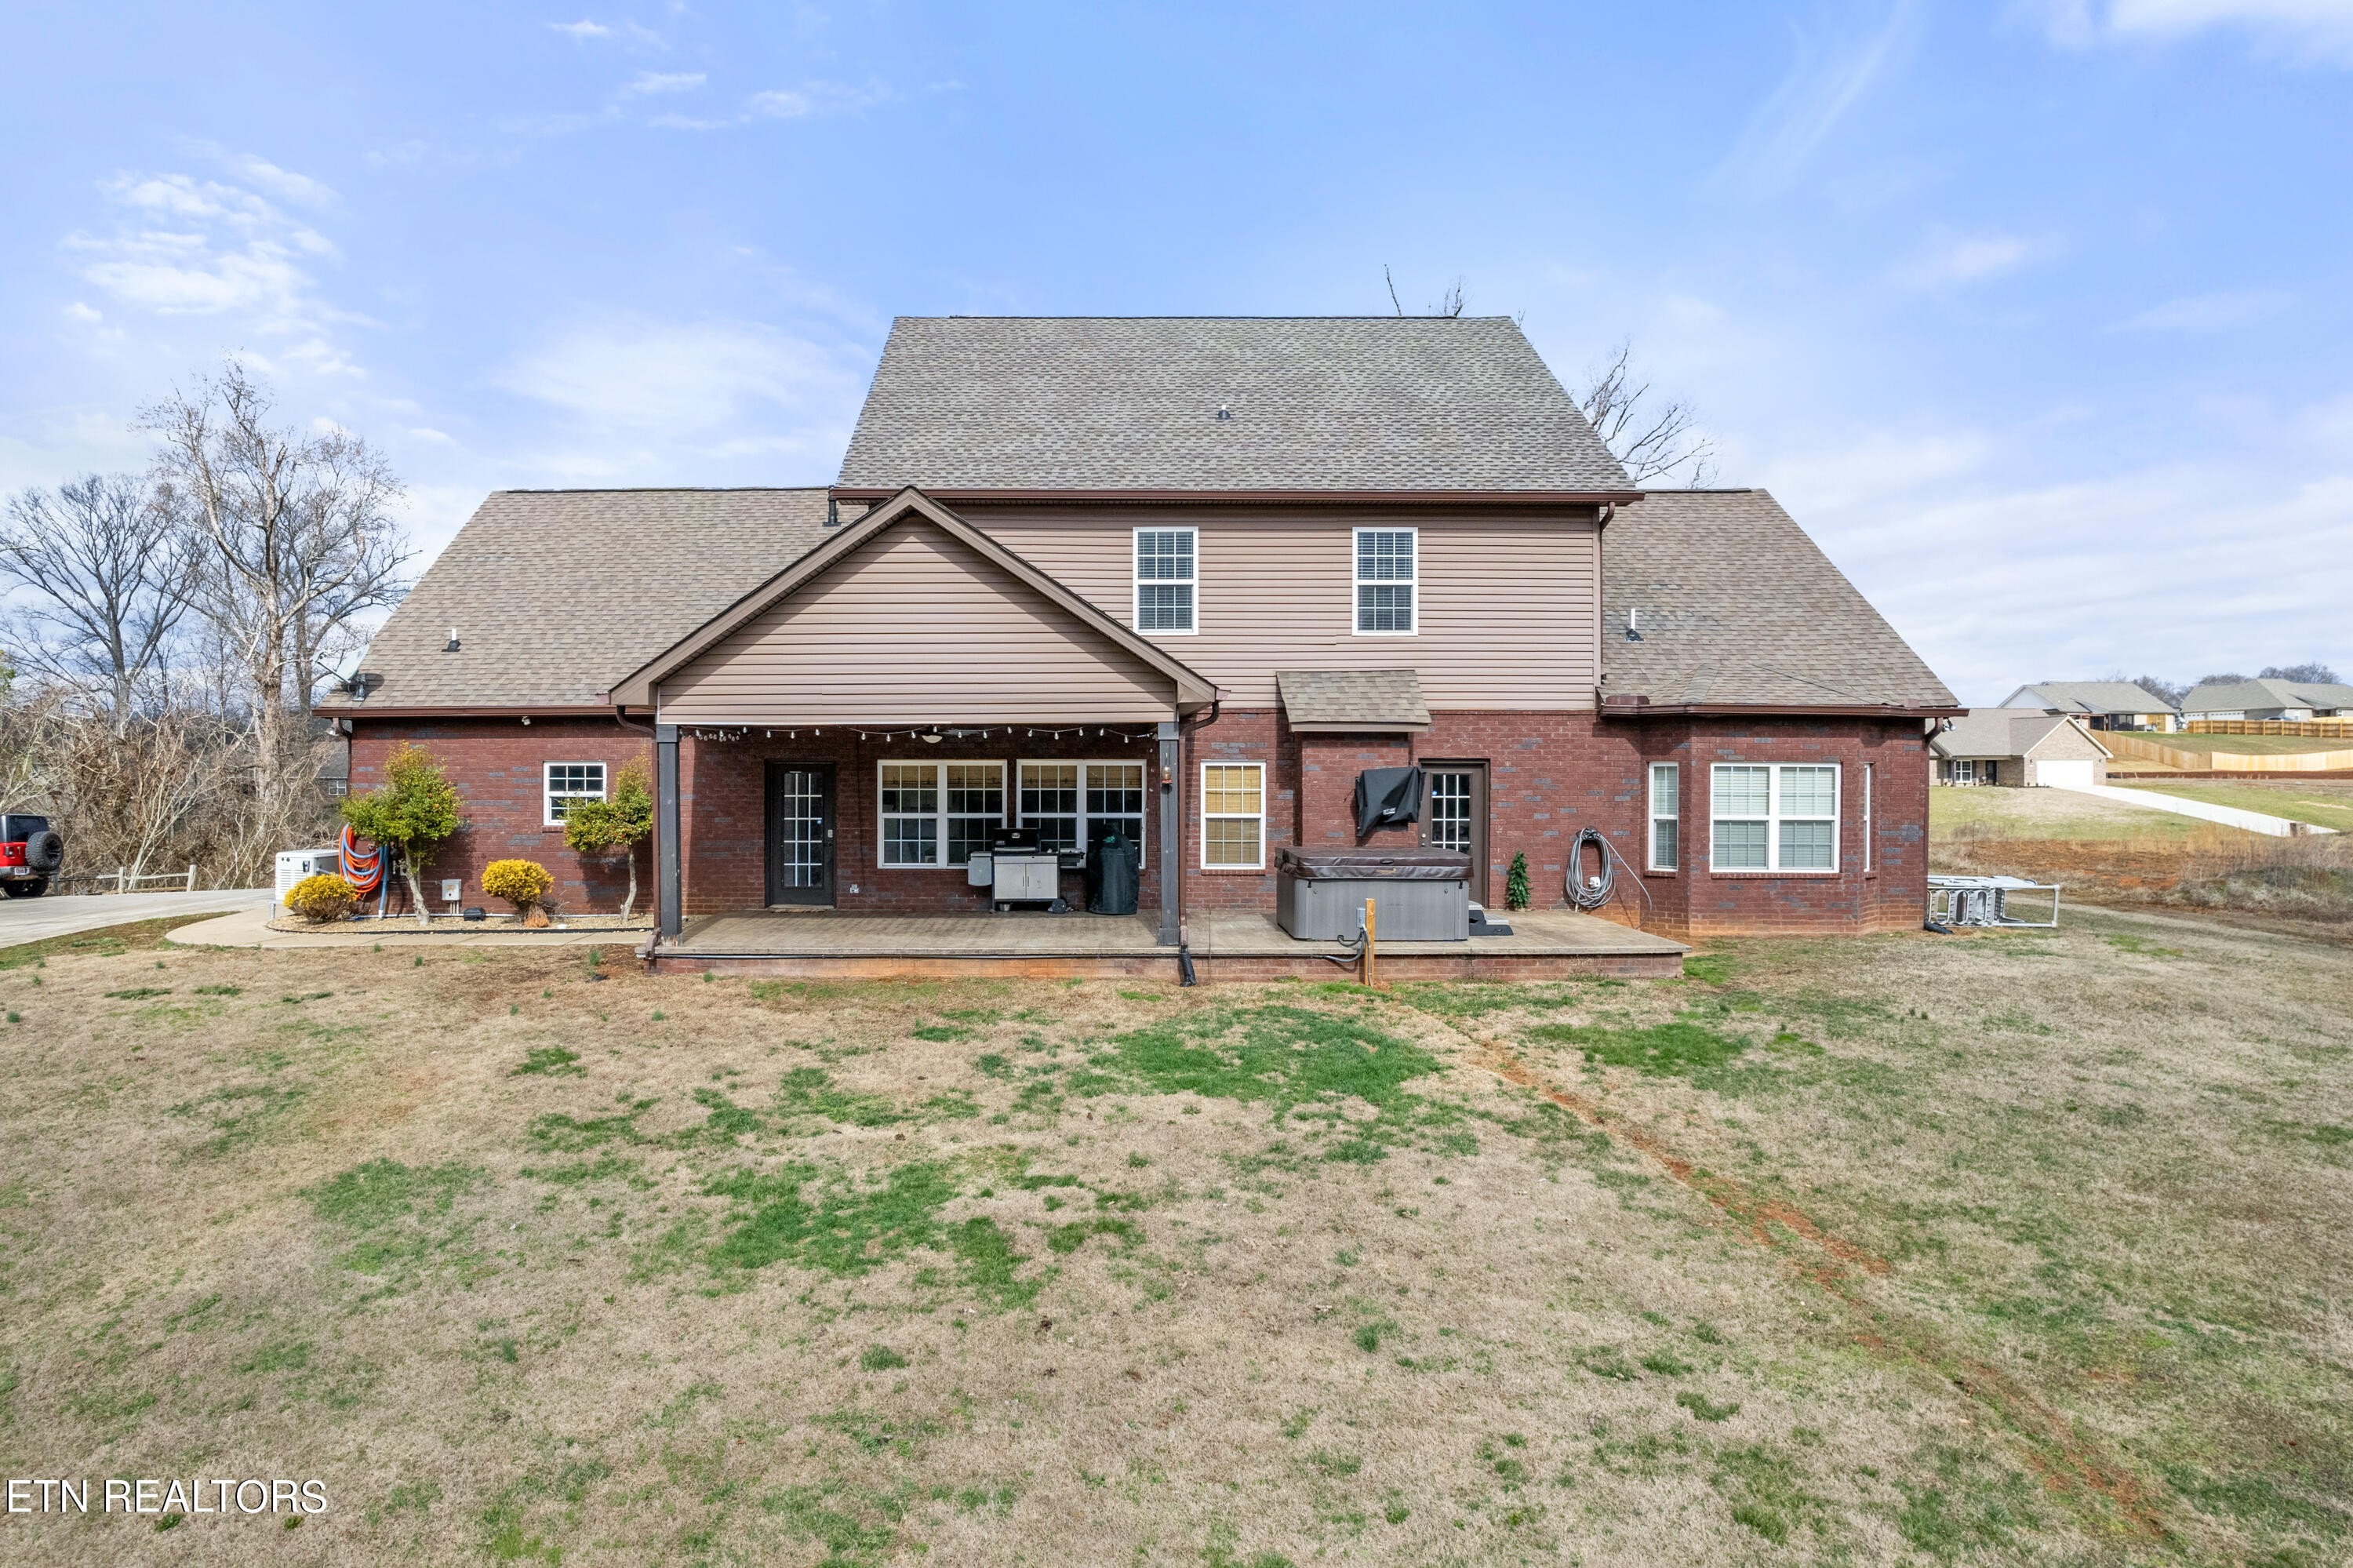 41. 1810 Griffitts Mill Circle